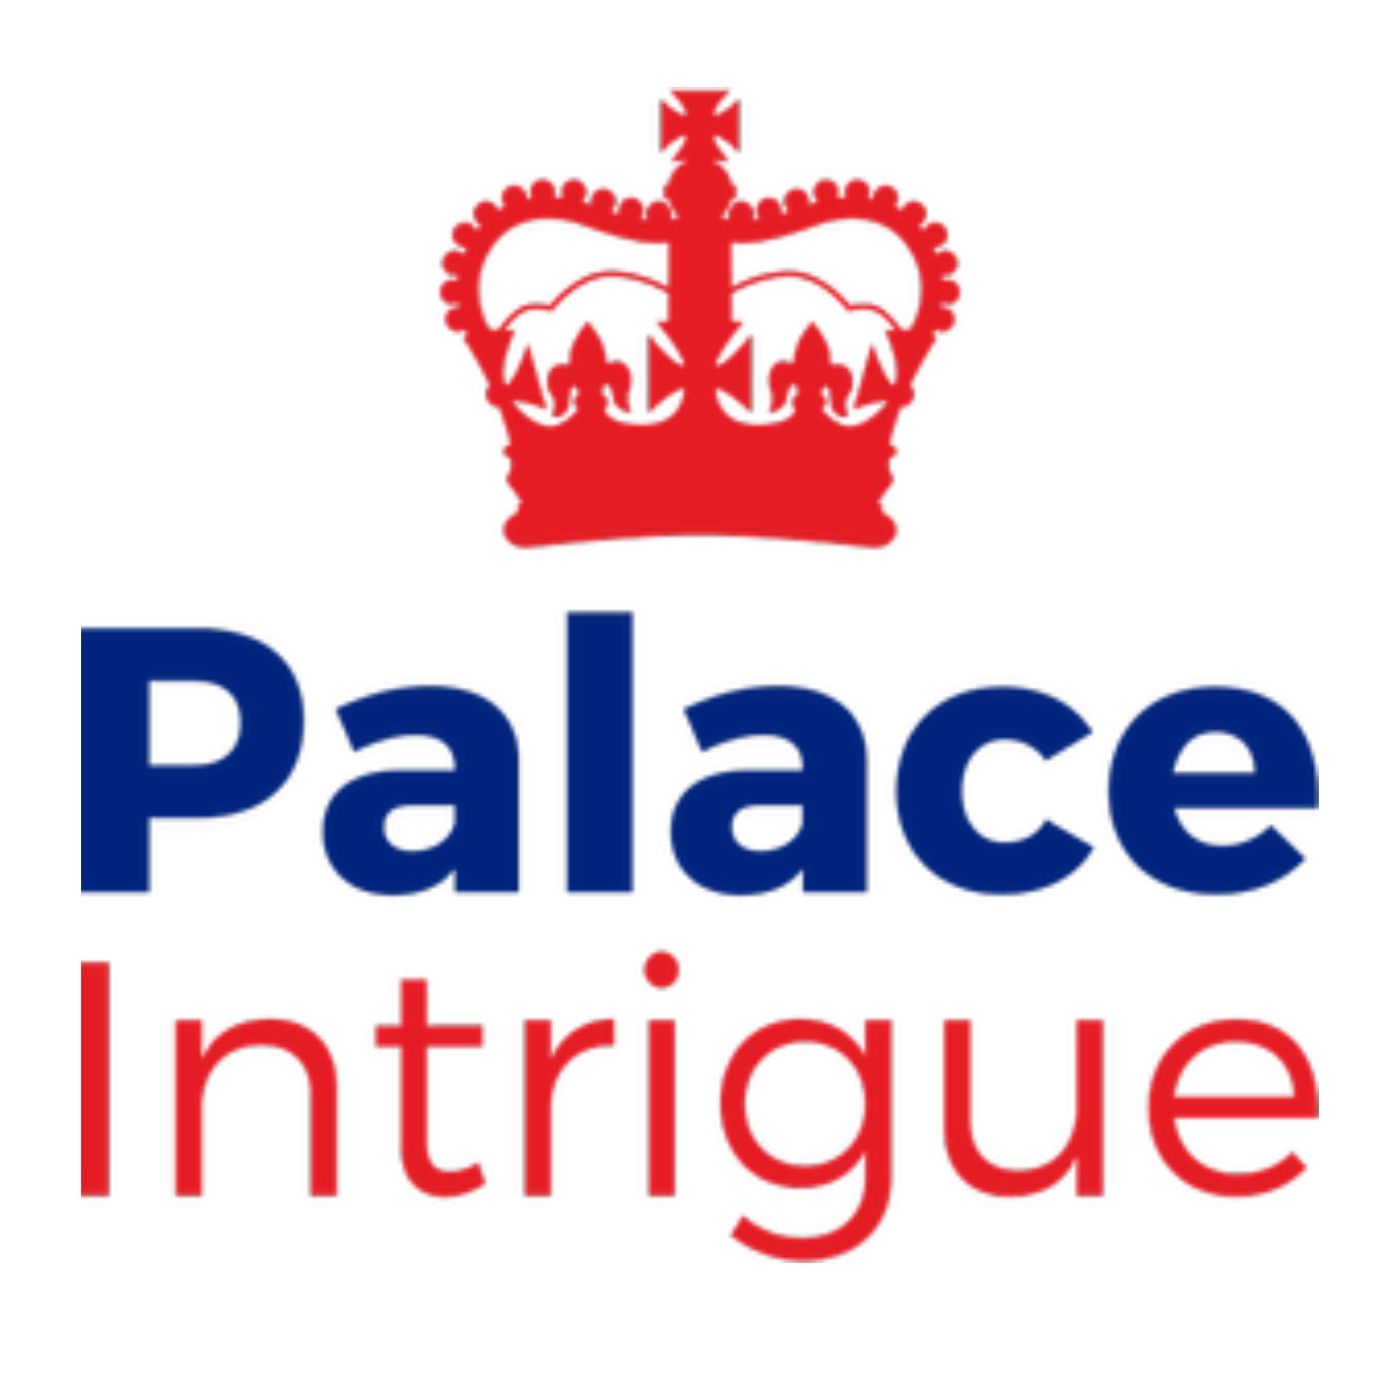 Introducing...The Palace Four Image